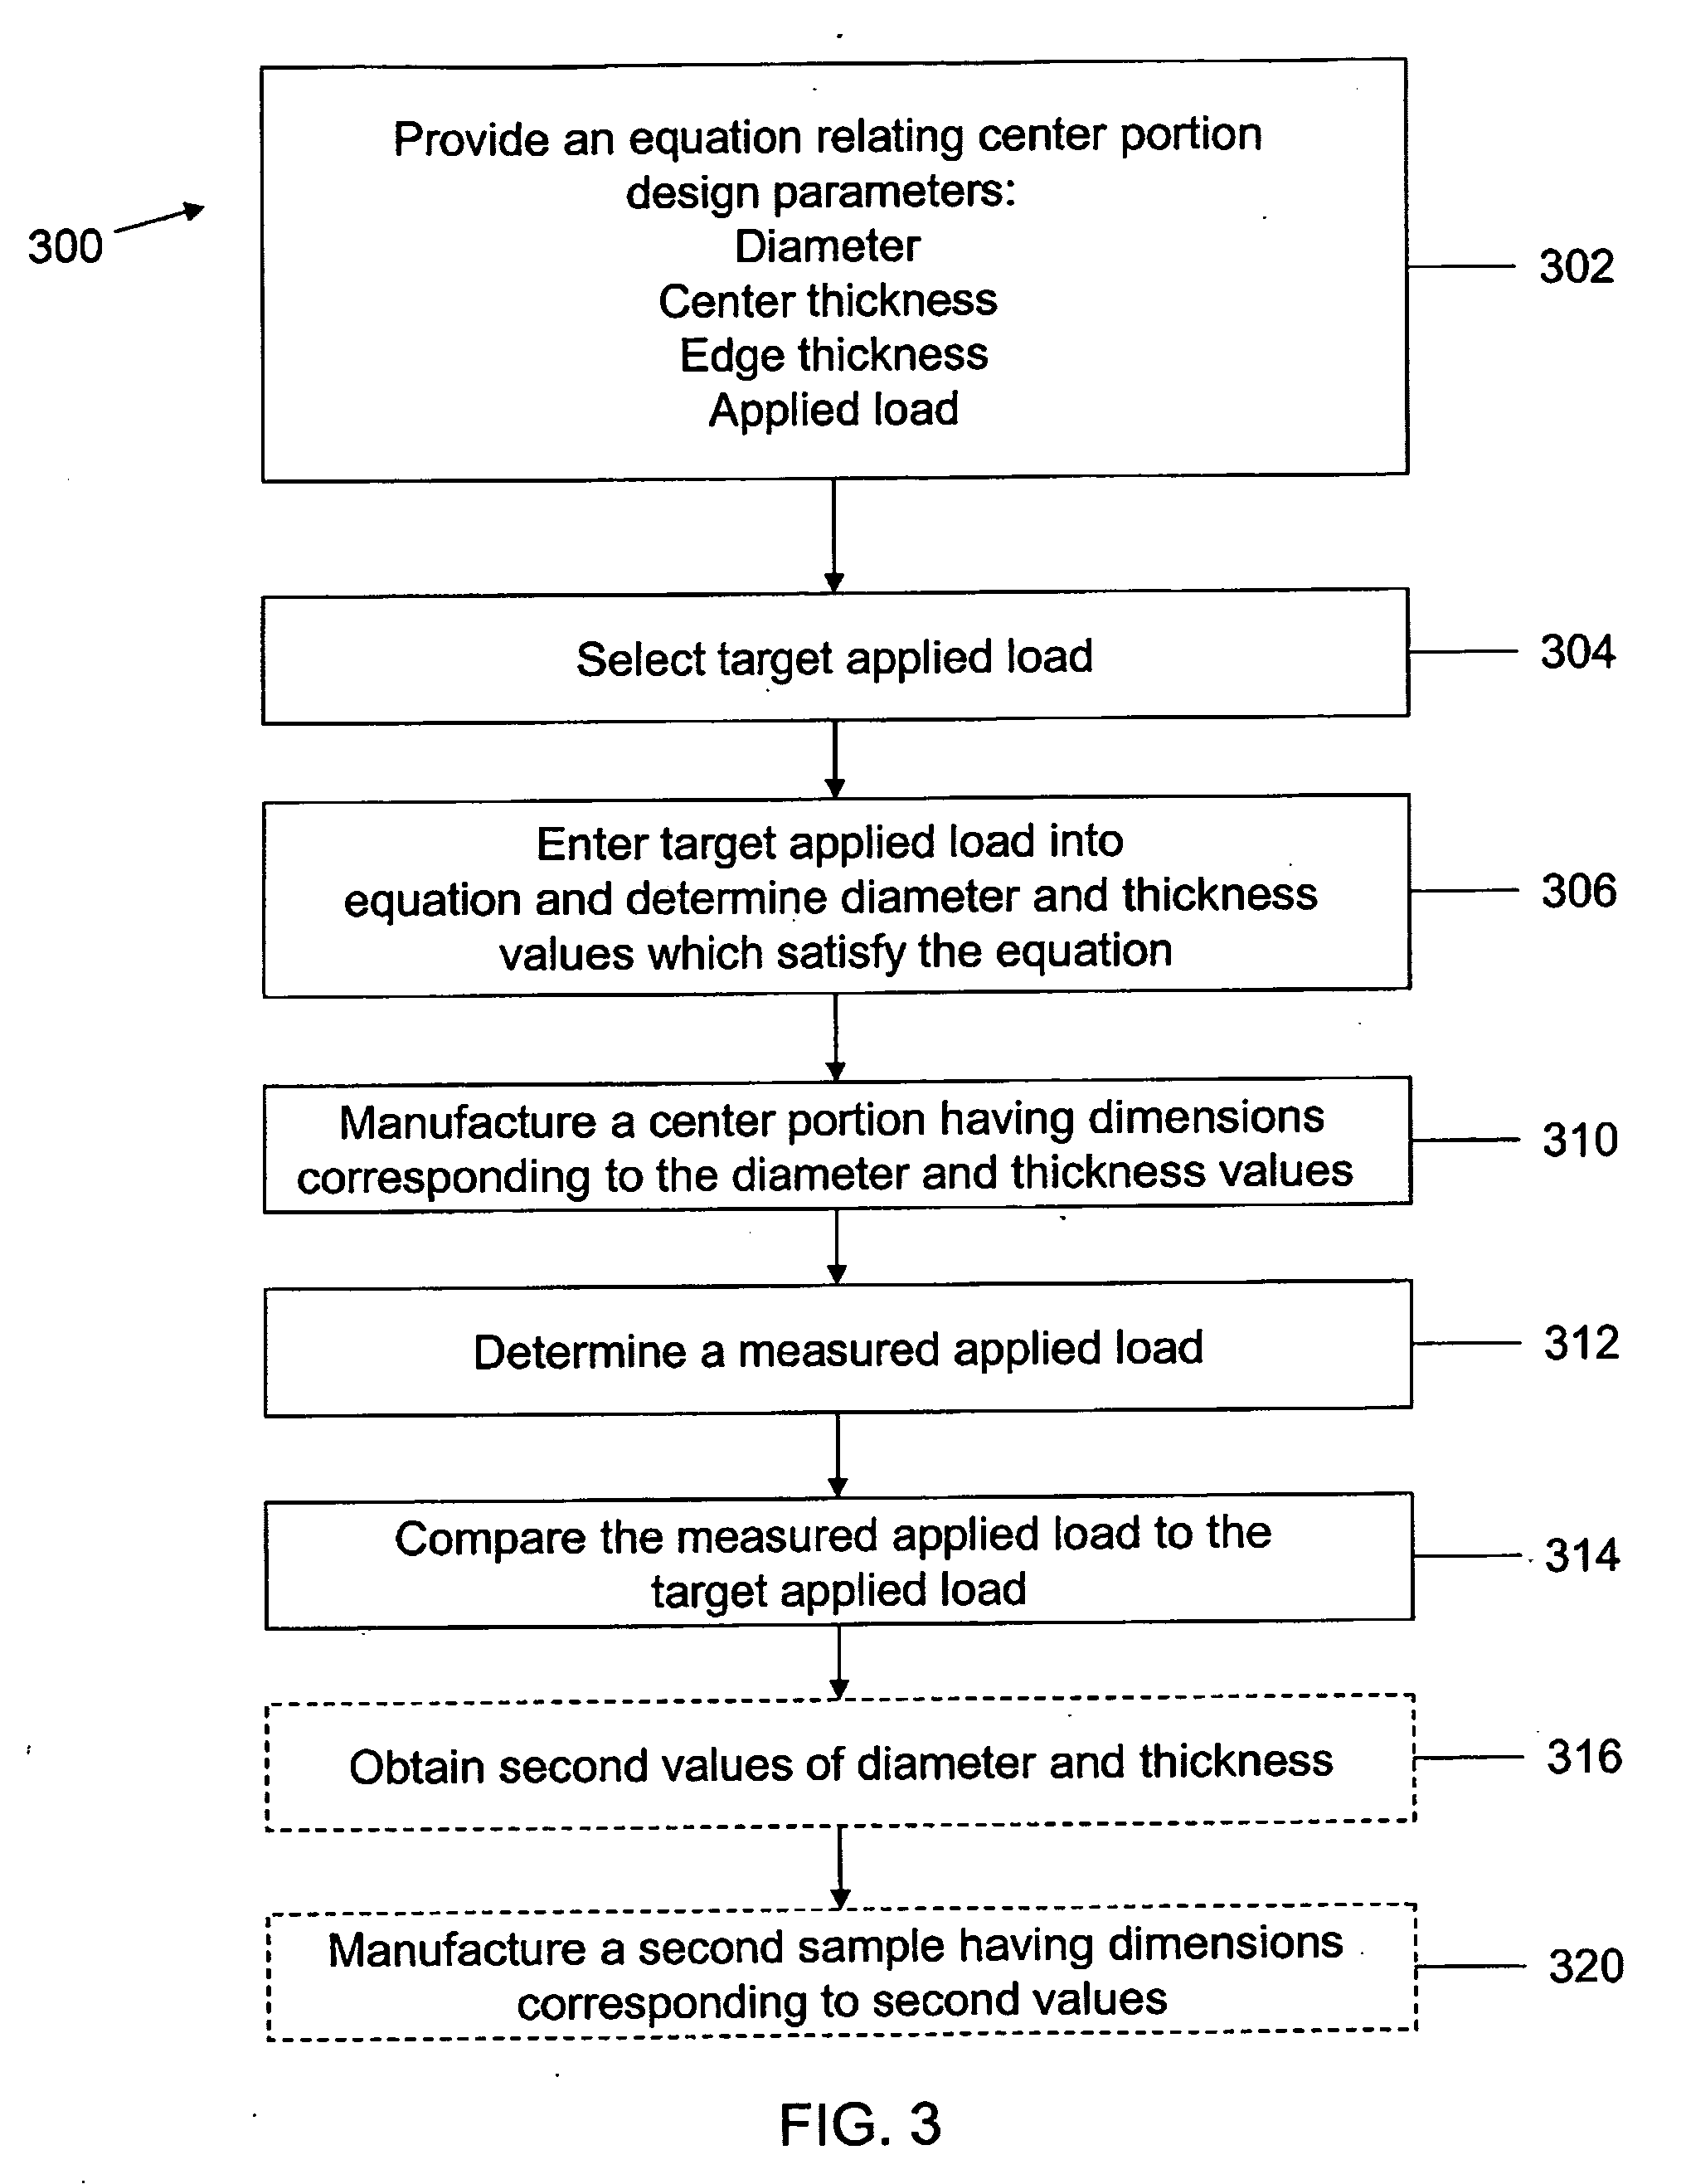 Hybrid contact lens with improved resistance to flexure and method for designing the same